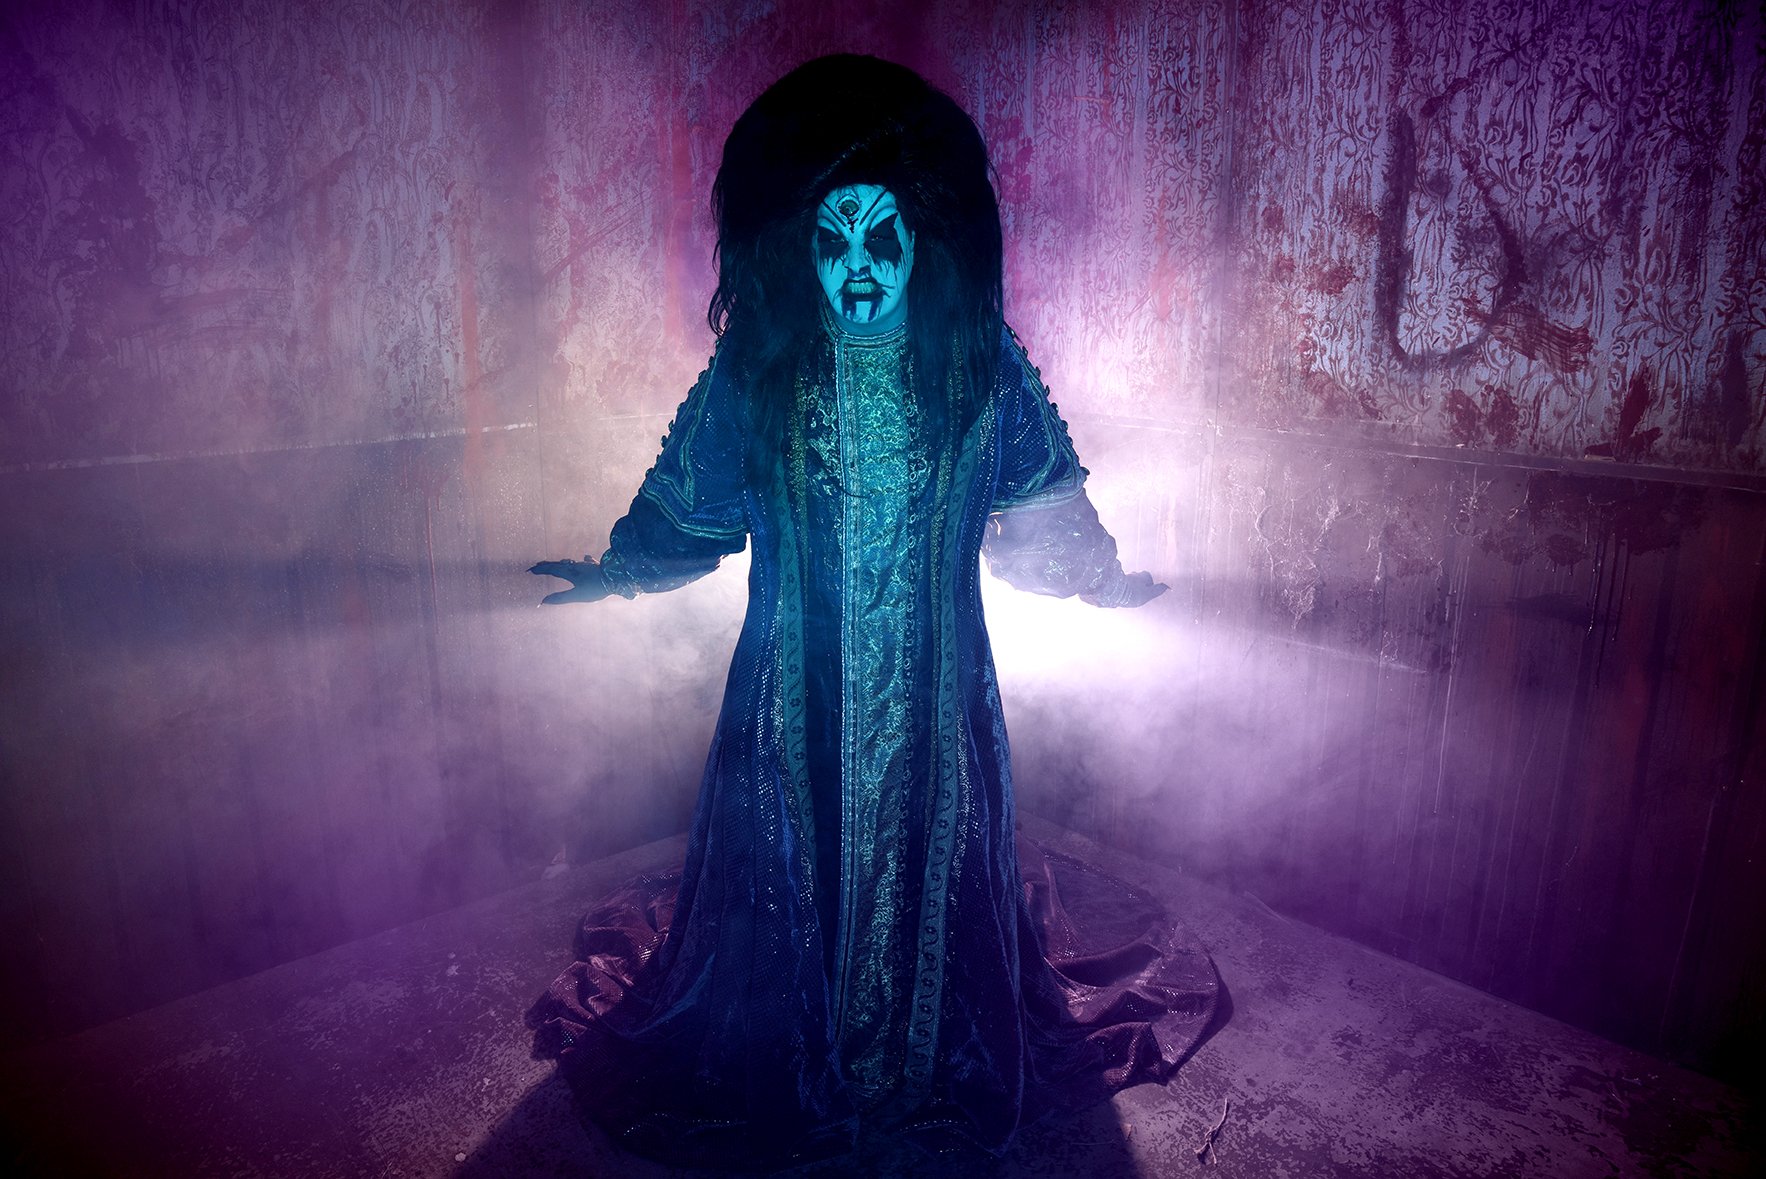 San Francisco’s spookiest haunted house is inspired by the city’s ties to cults